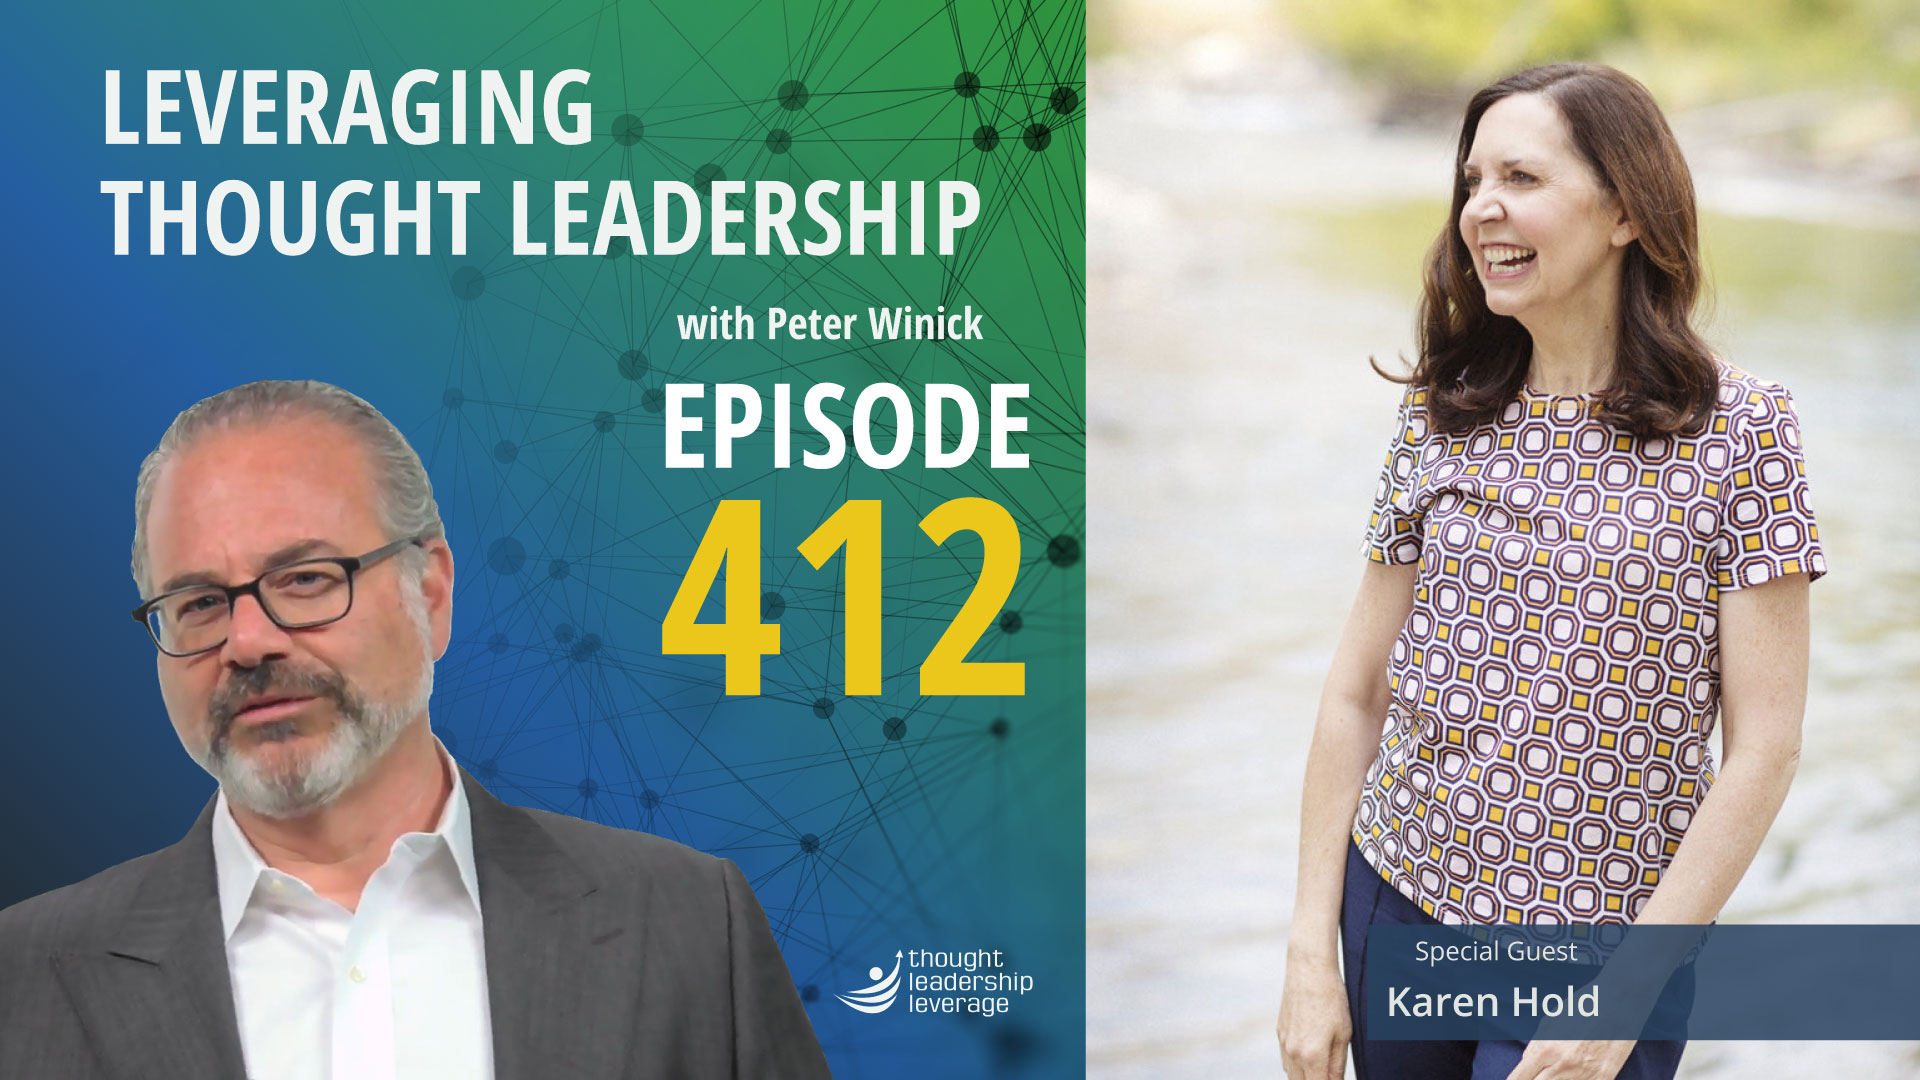 The Innovator’s Journey to Thought Leadership | Karen Hold